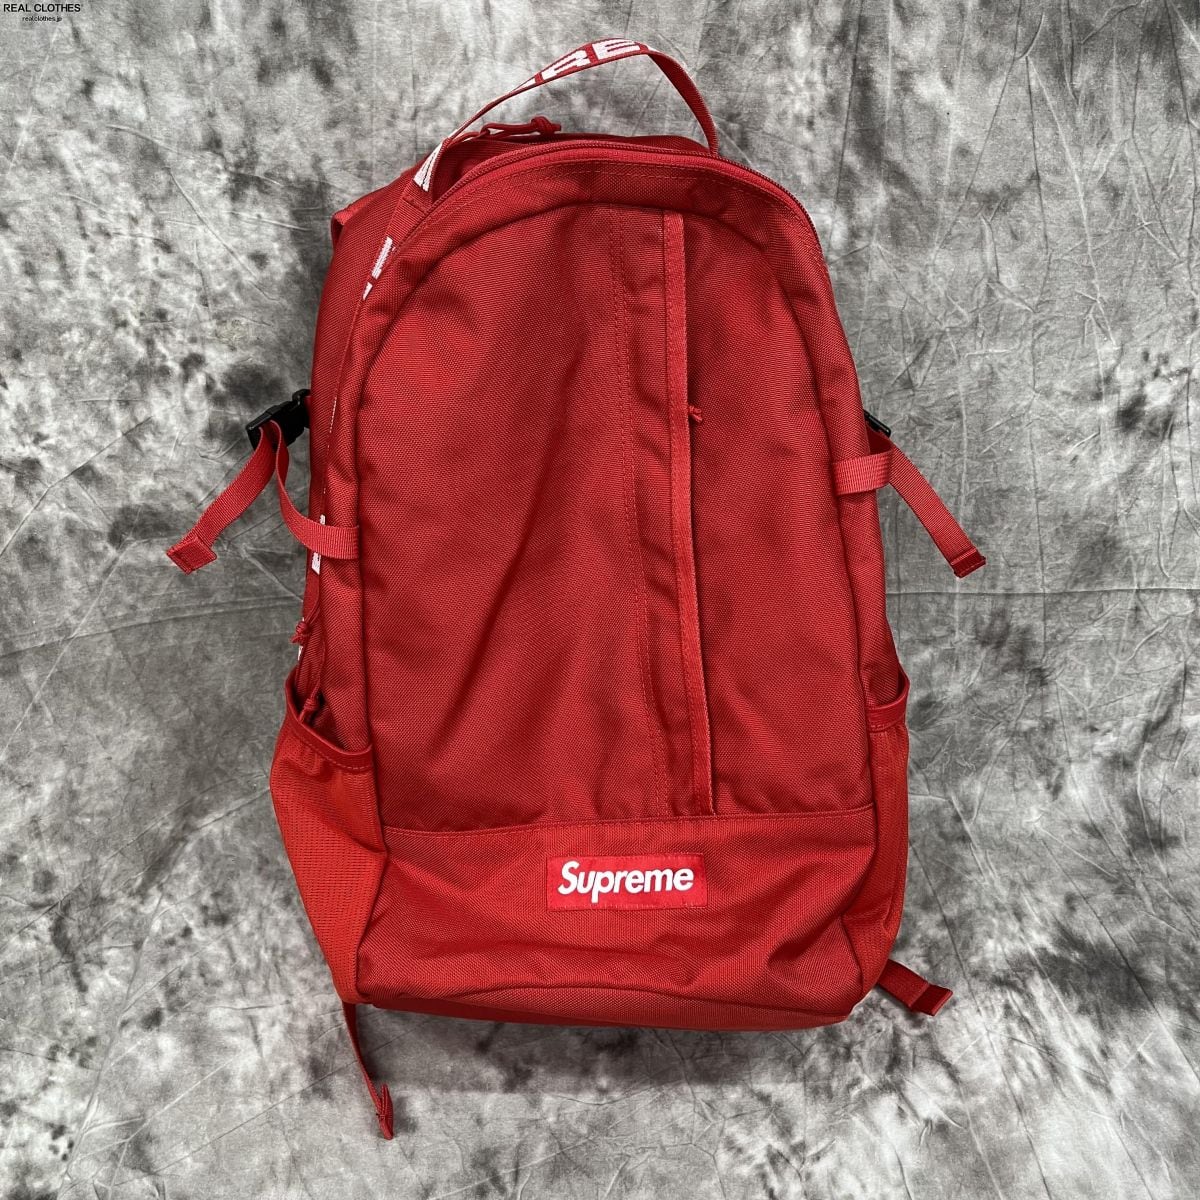 Supreme/シュプリーム【18SS】Backpack/バックパック/リュックサック レッド